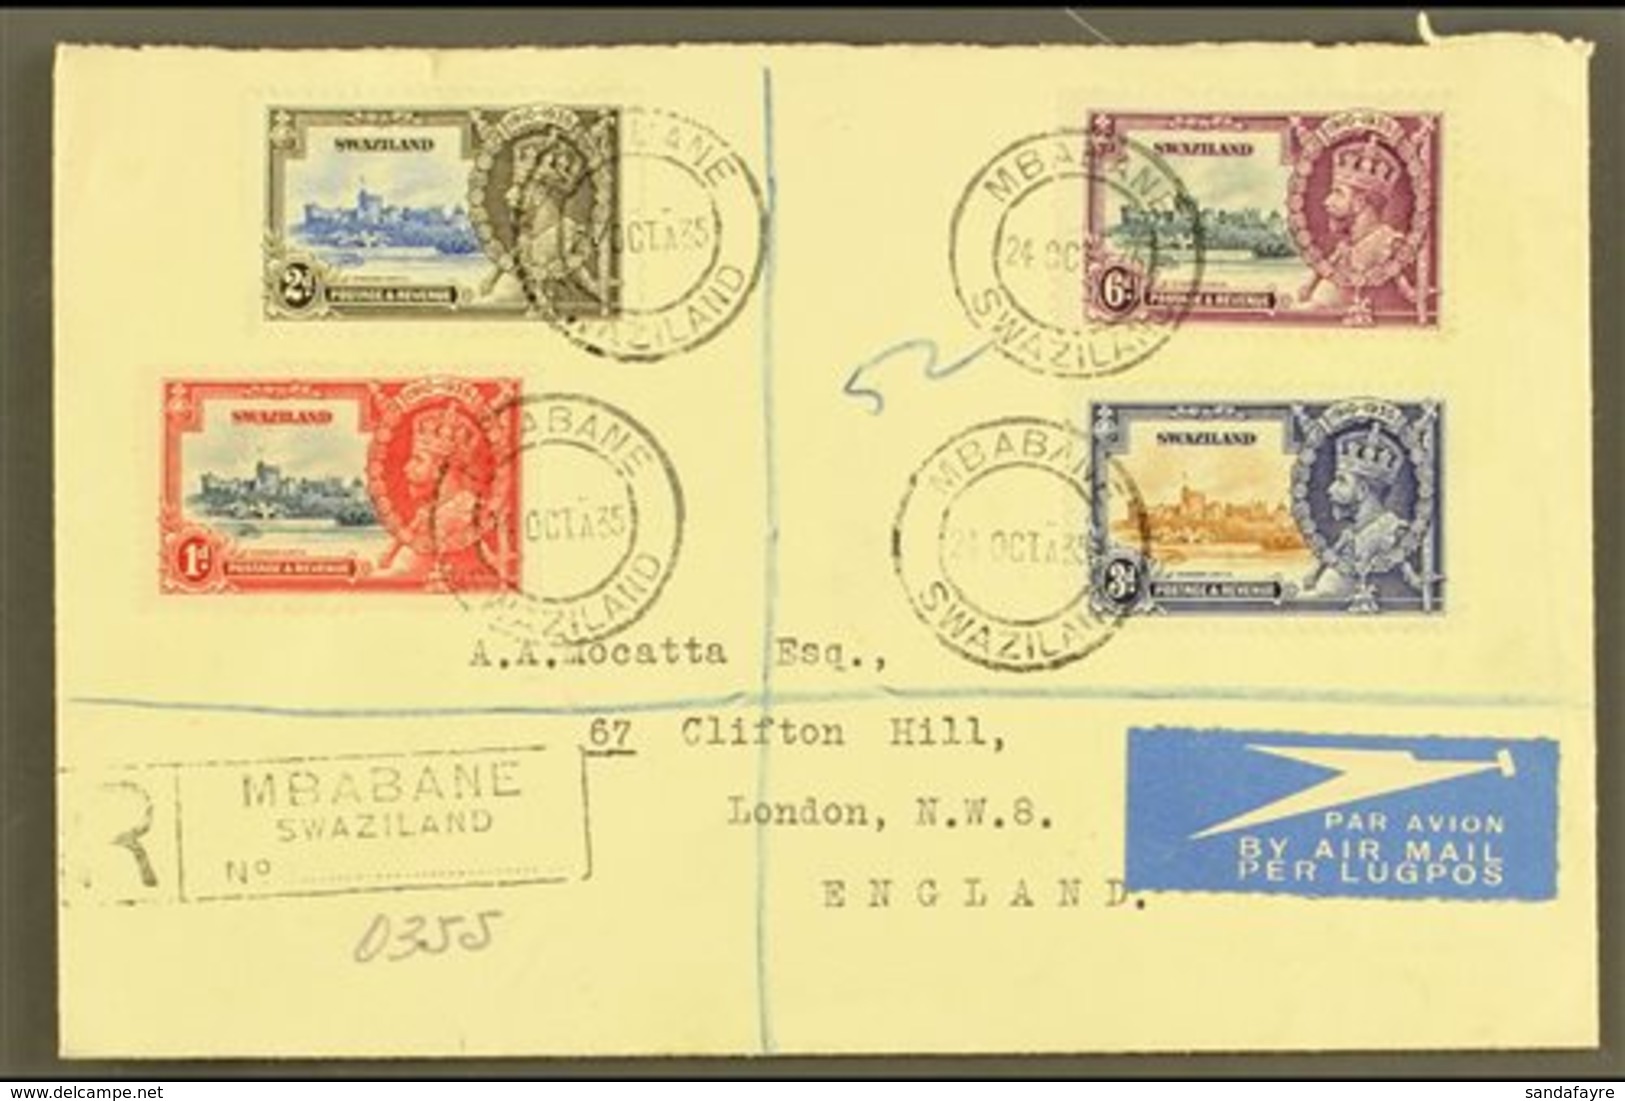 1935  Silver Jubilee Complete Set, SG 21/24, Fine Used On Registered Air Cover To London, Mbabane Cds's.  For More Image - Swasiland (...-1967)